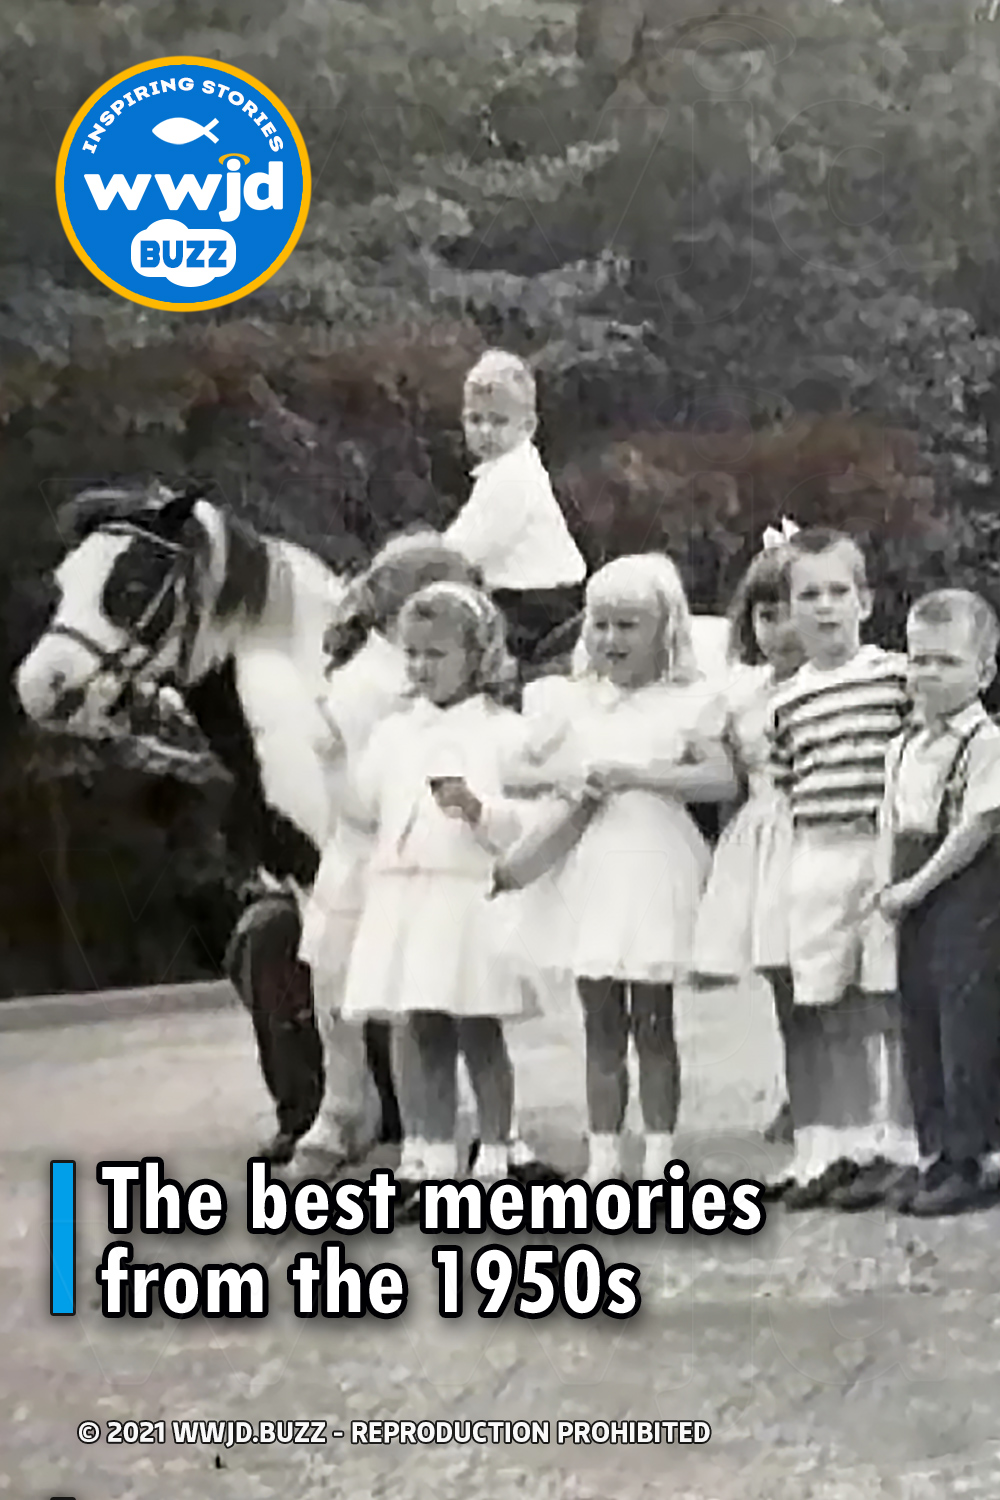 The best memories from the 1950s